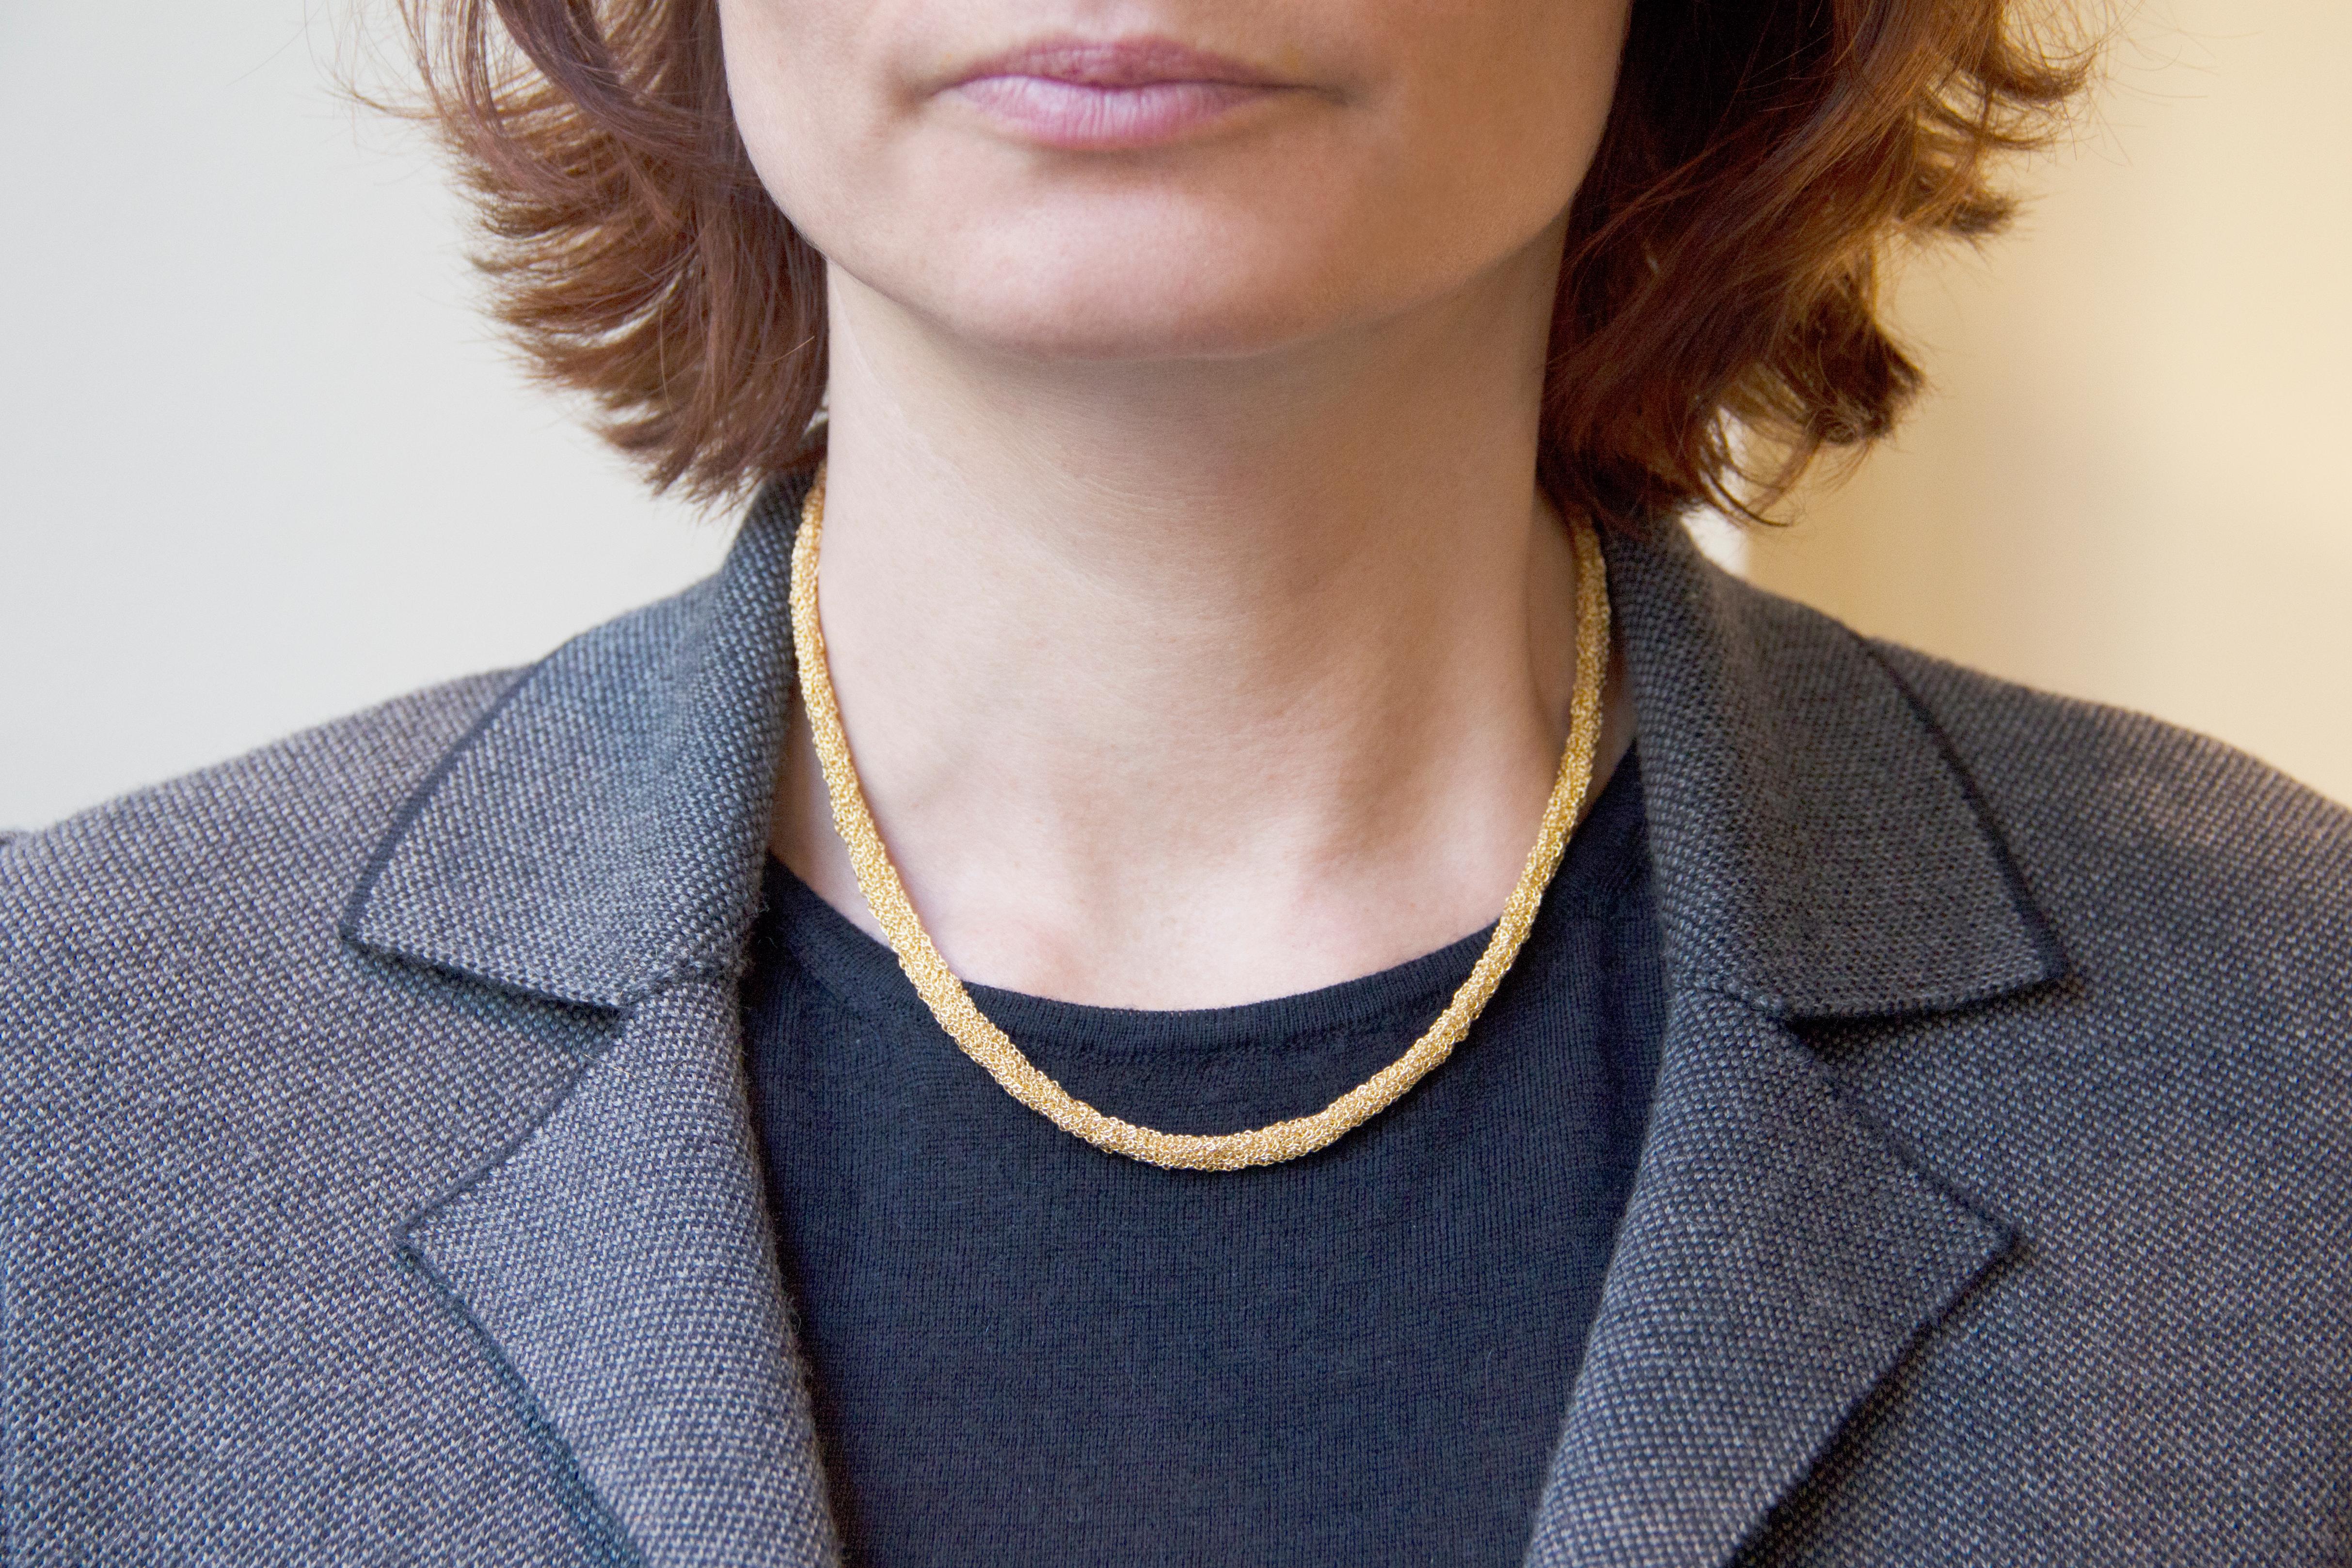 Jona design collection, hand crafted in Italy, gold-plate sterling silver long chain necklace made of woven small chains.
Dimensions : L 17.32 in x D 0.19 in - L 44 cm x D 4.96 mm
All Jona jewelry is new and has never been previously owned or worn.